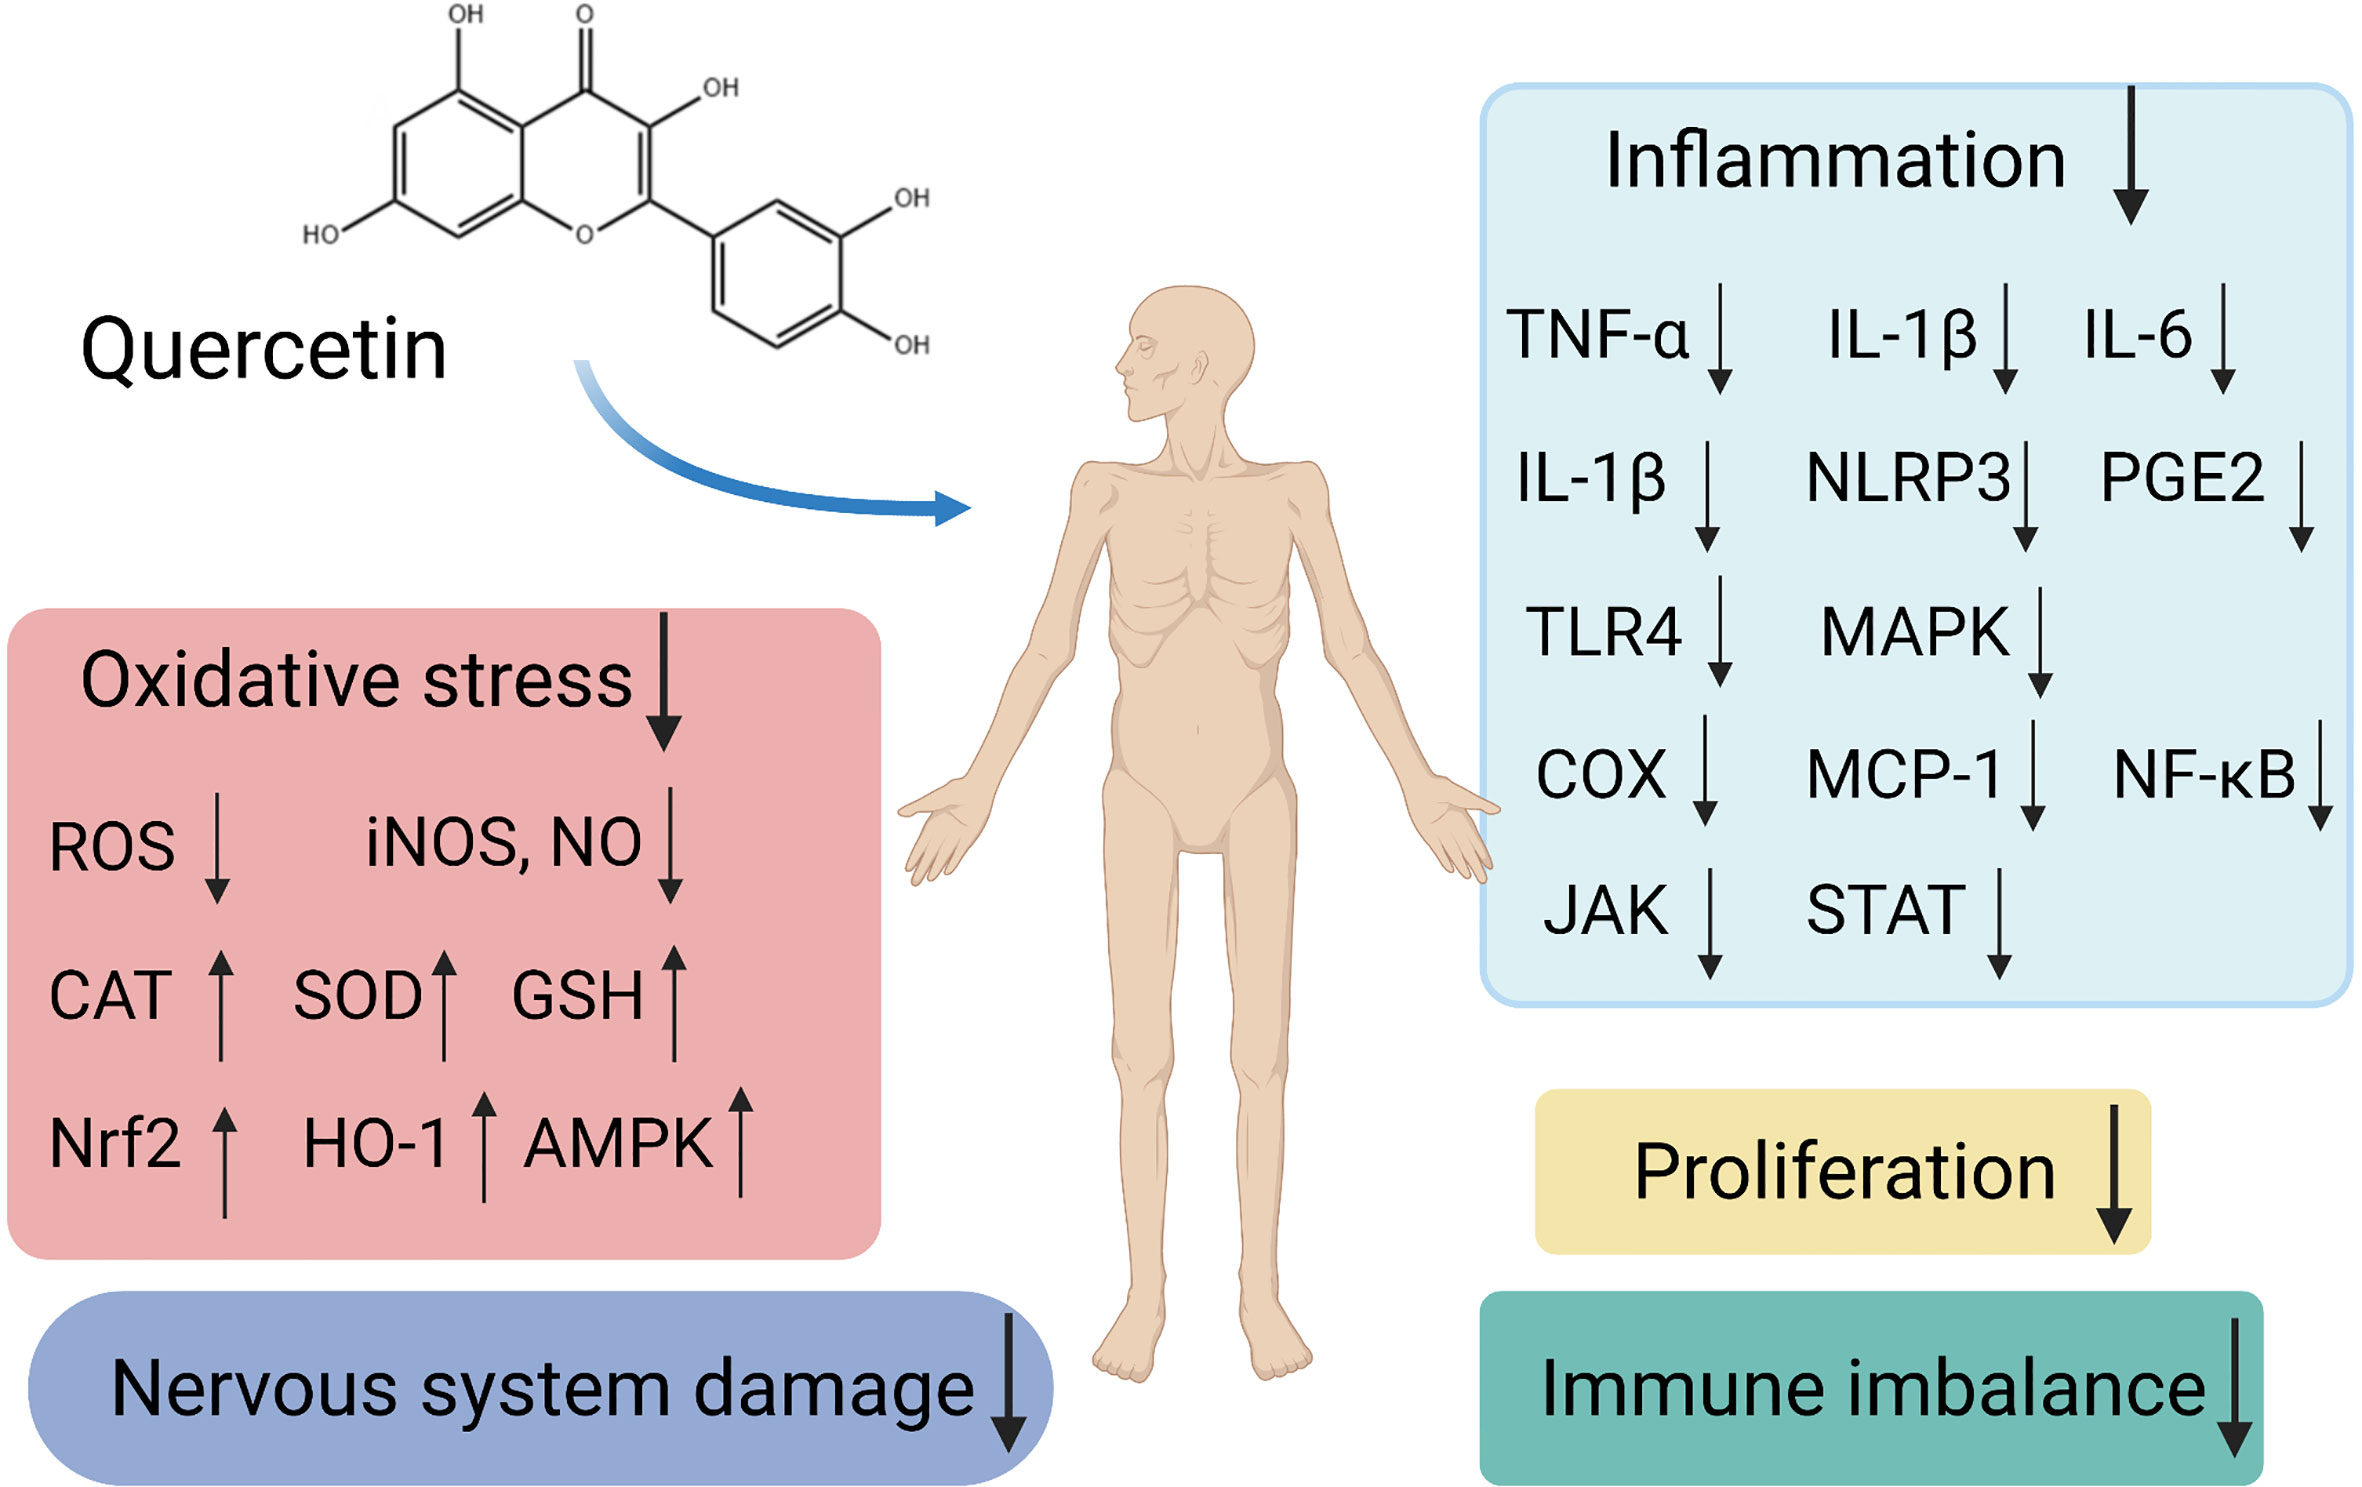 Quercetin and immune system